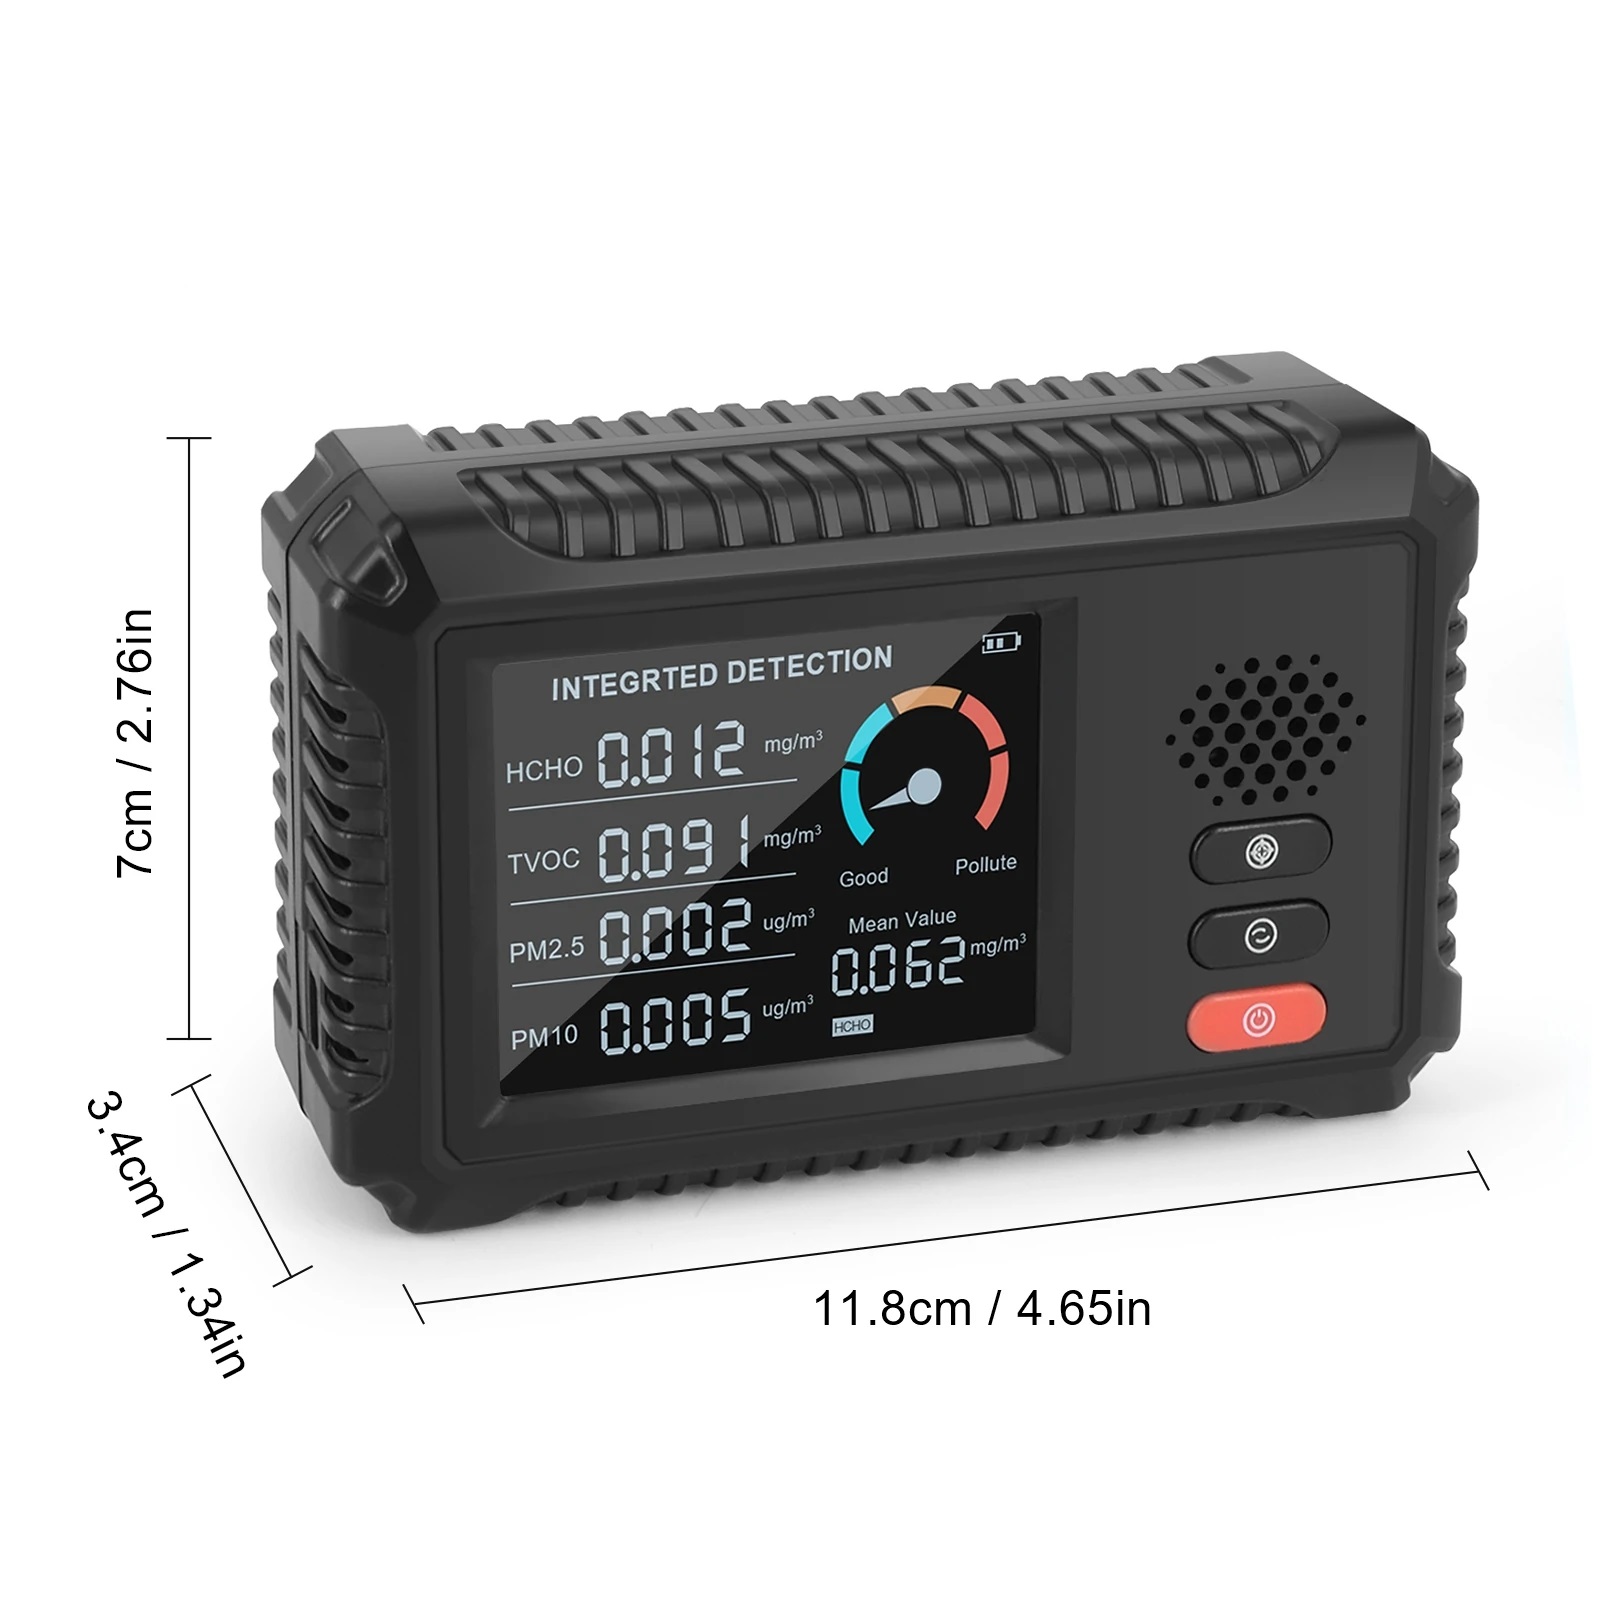 HCHOTVOCPM25PM10-Tester-Formaldehyde-Detector-Real-Time-Data-Monitoring-Multifunctional-Air-Quality--1892301-9